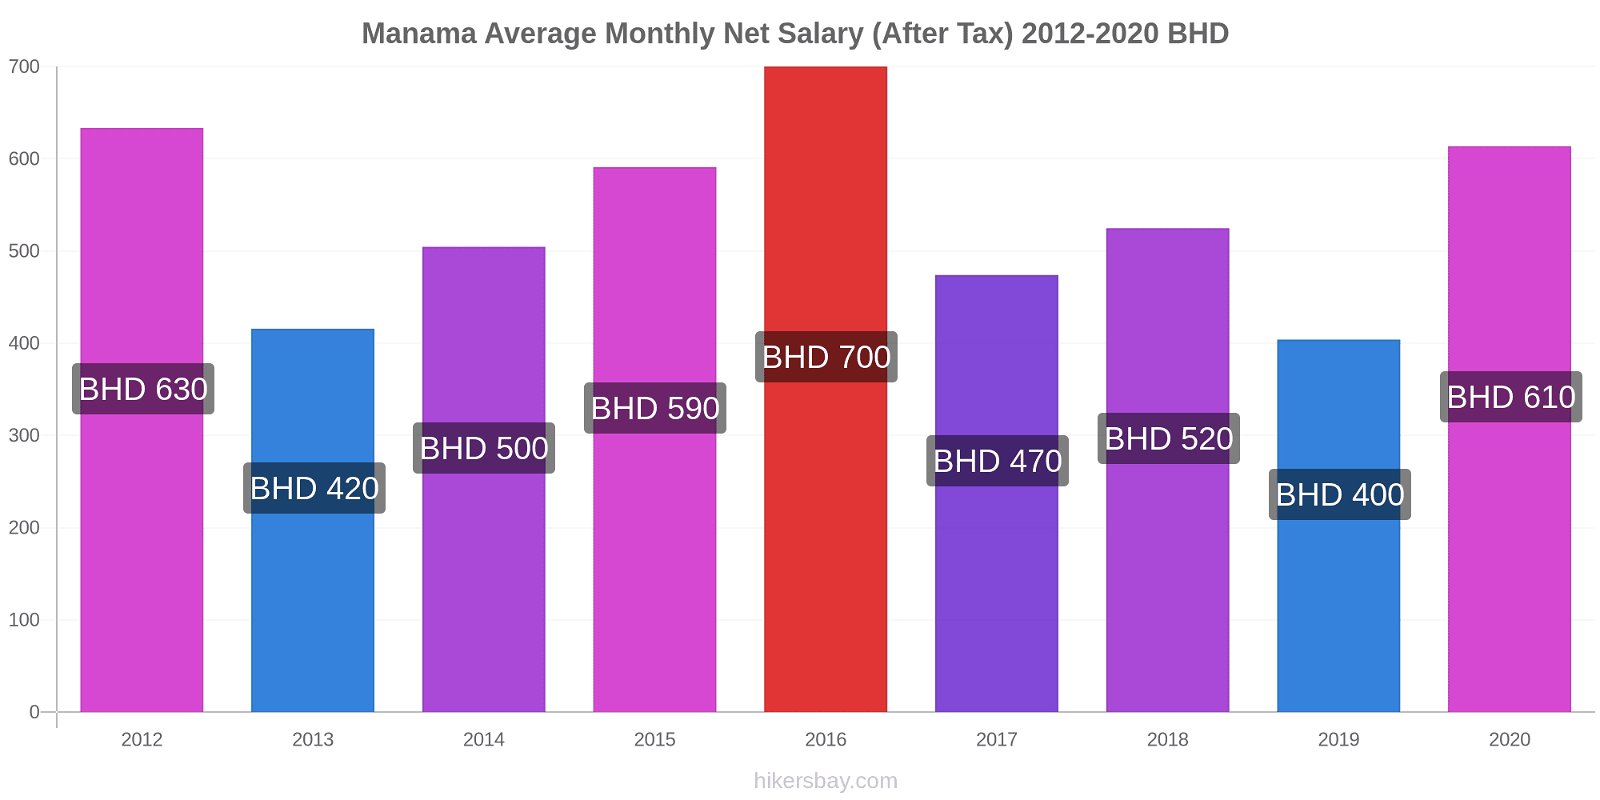 Manama price changes Average Monthly Net Salary (After Tax) hikersbay.com